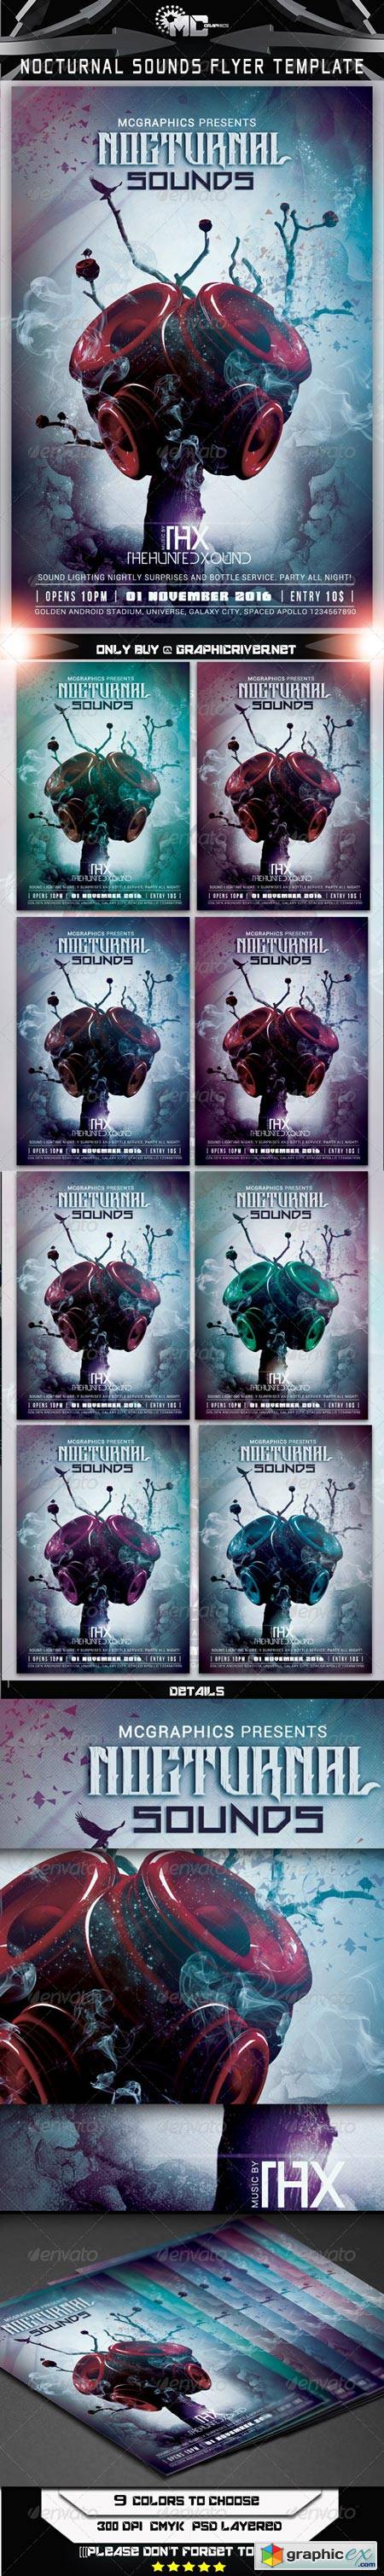 Nocturnal Sounds Flyer Template 7910675